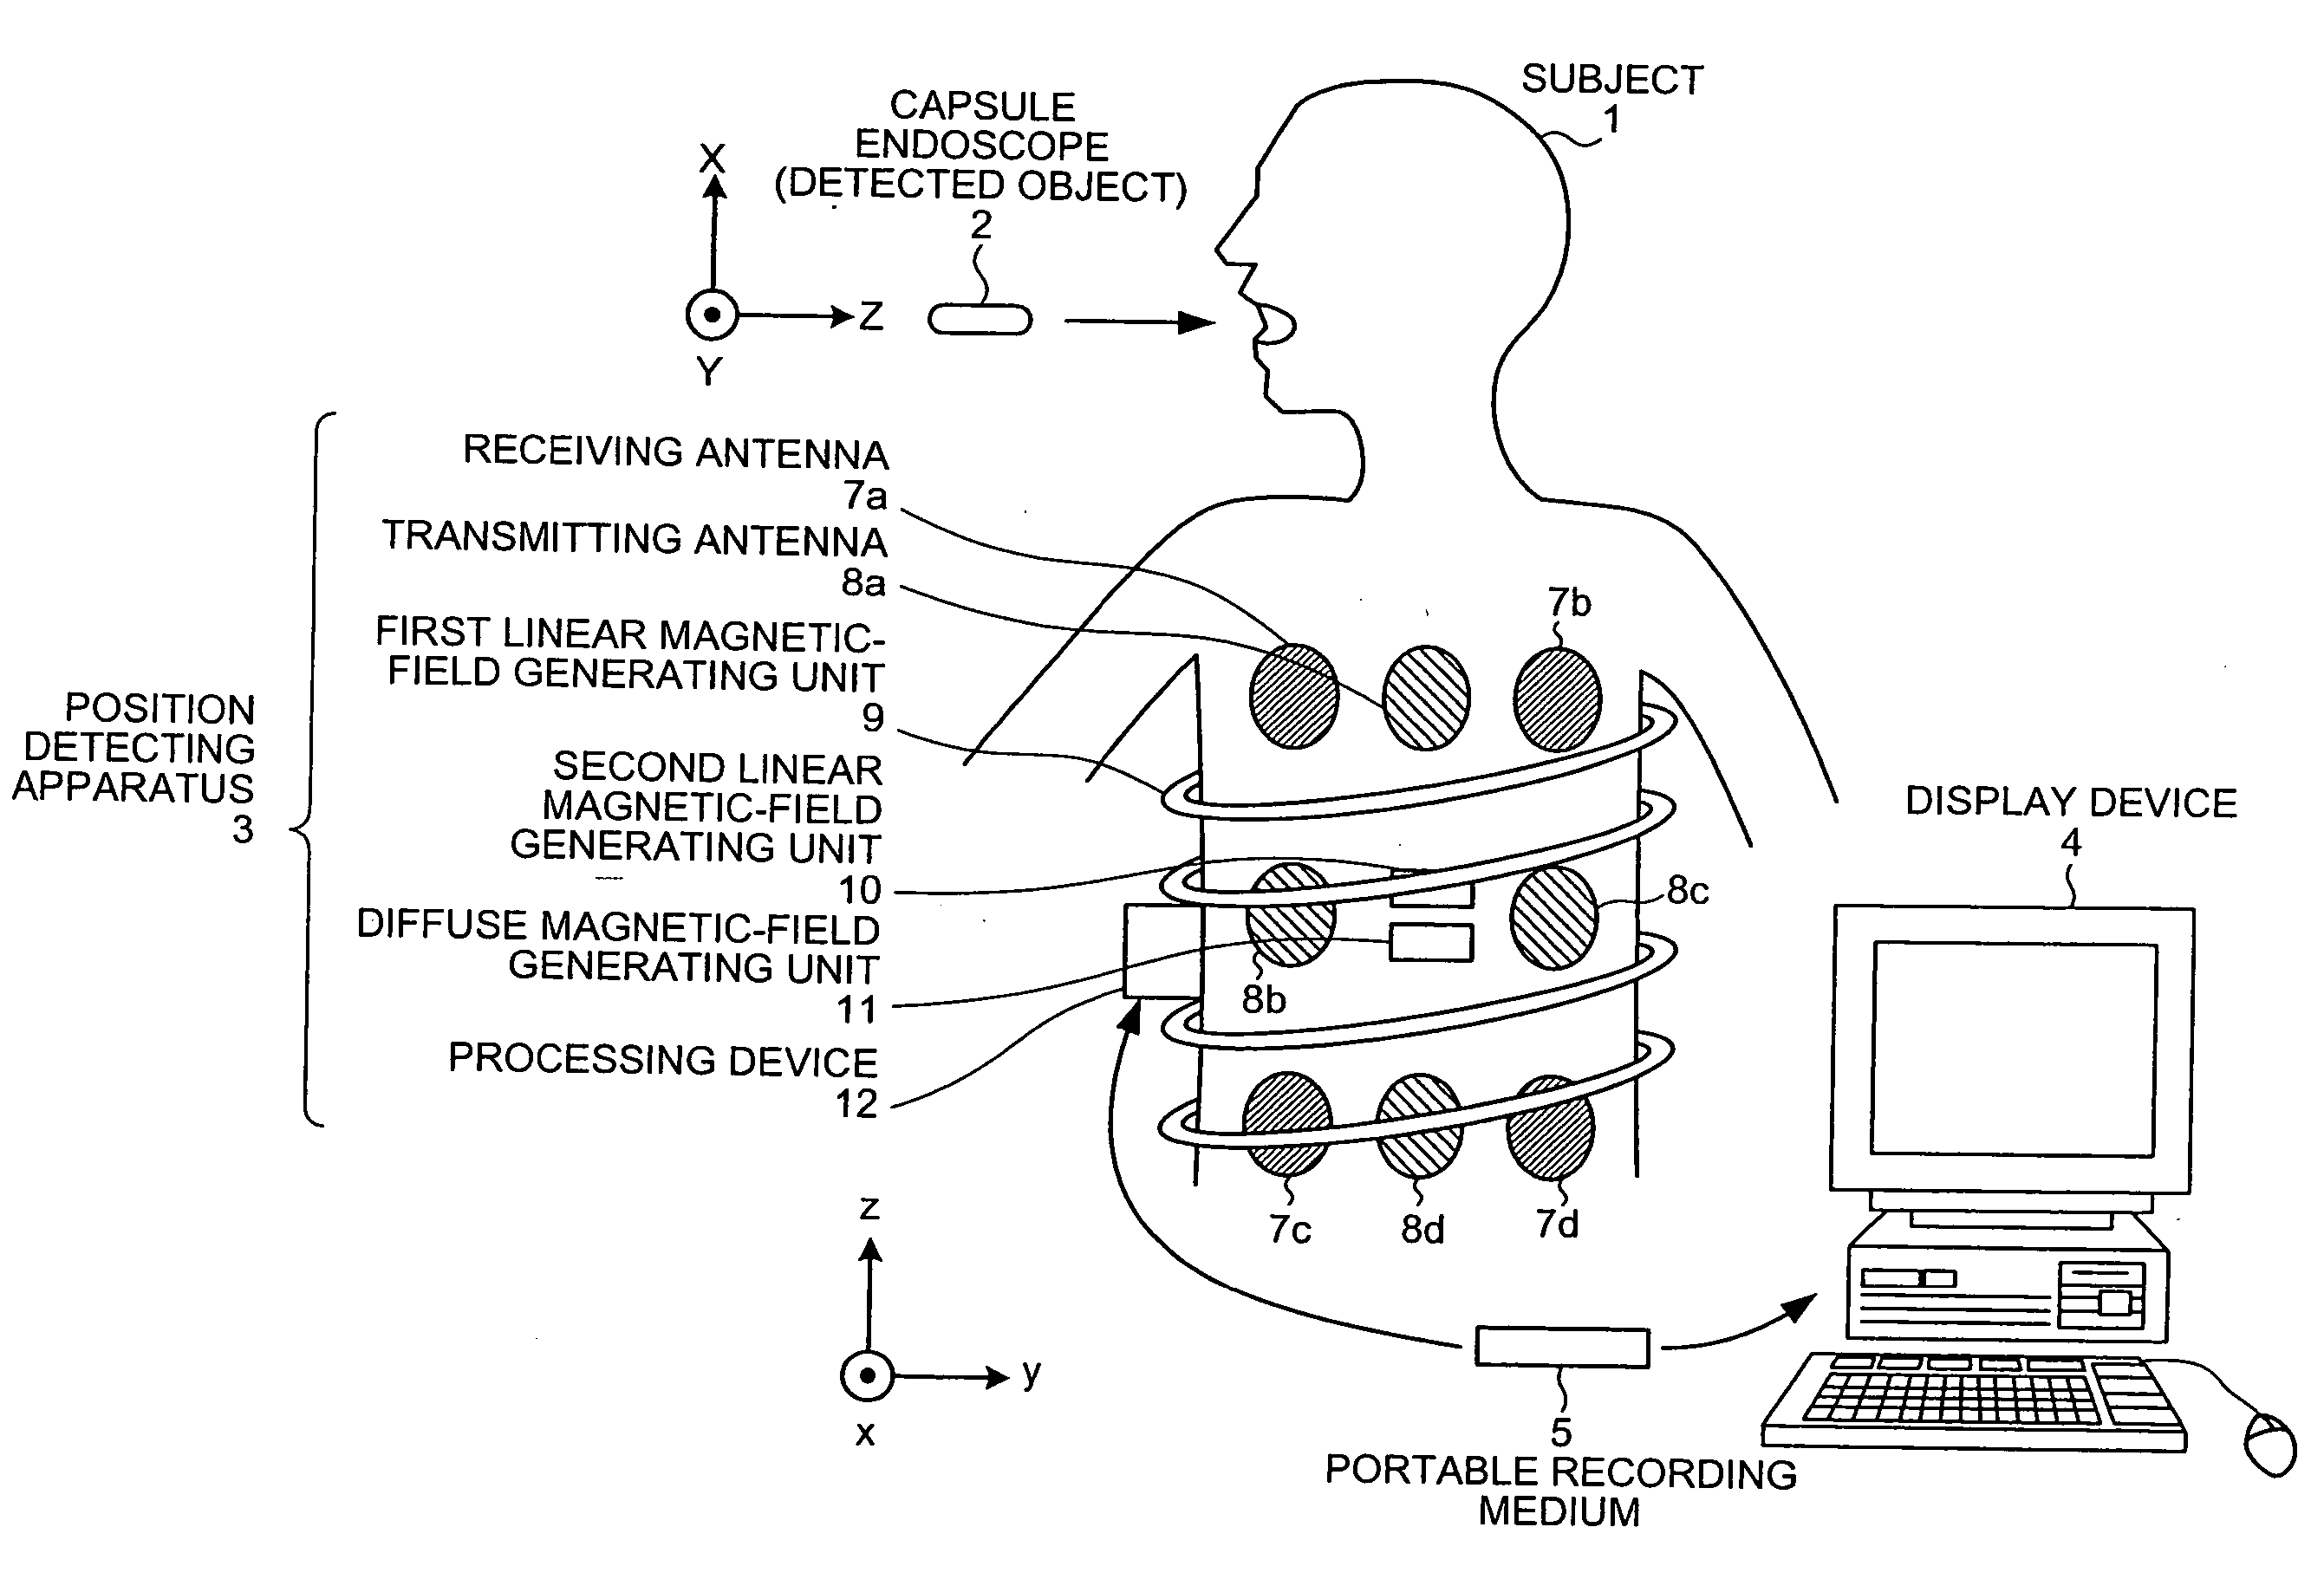 Body-insertable apparatus system